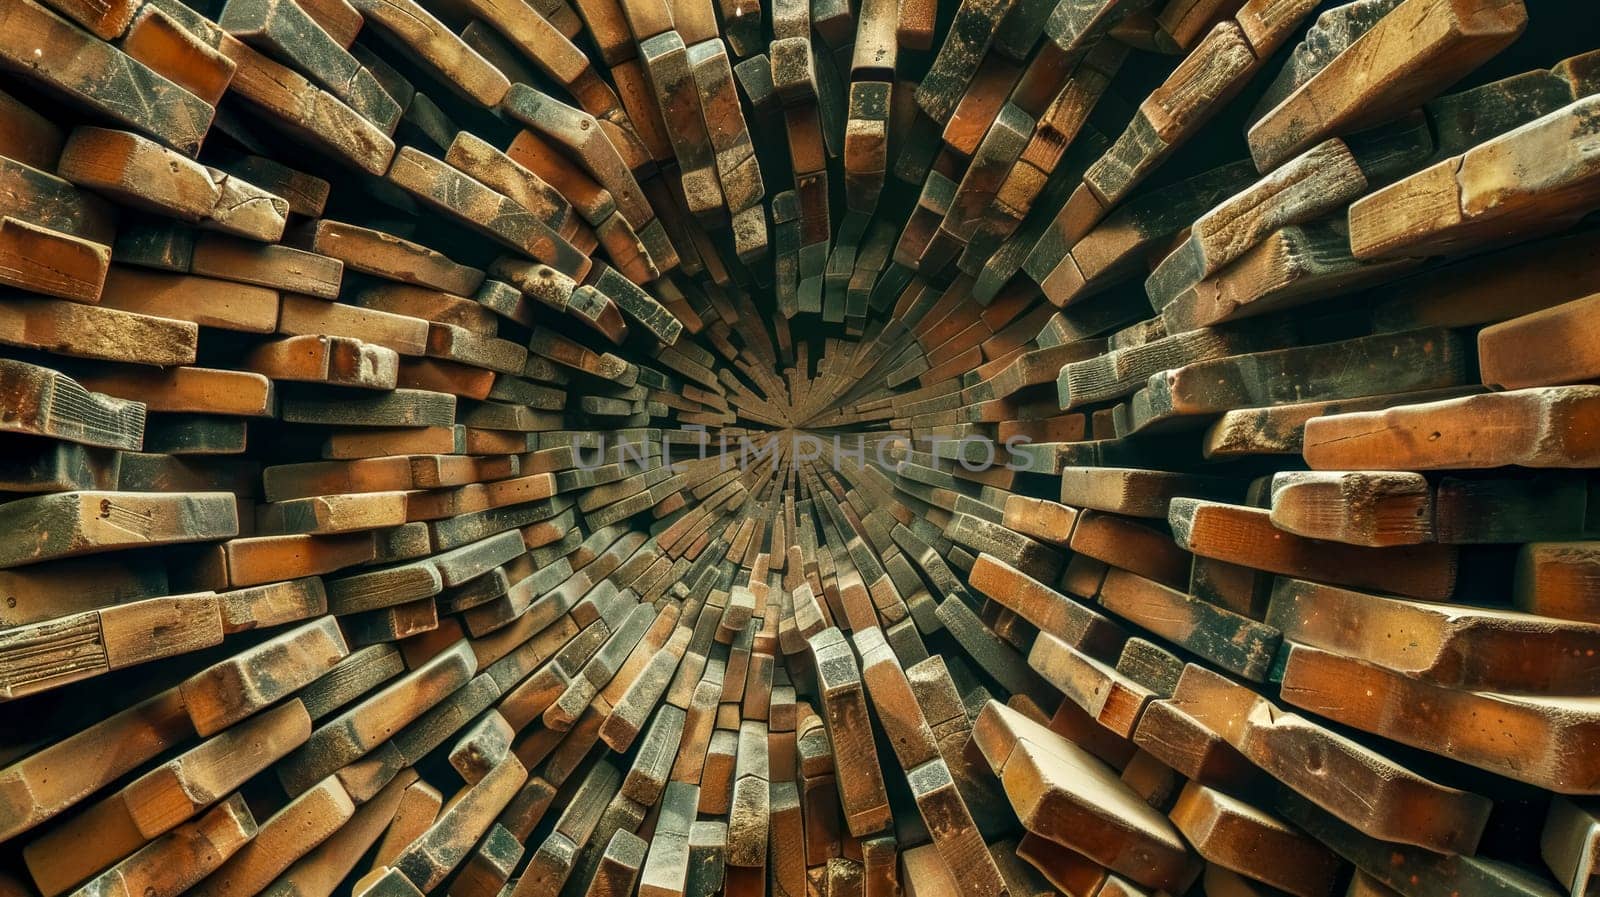 Captivating perspective view looking through a tunnel made of stacked wooden bricks